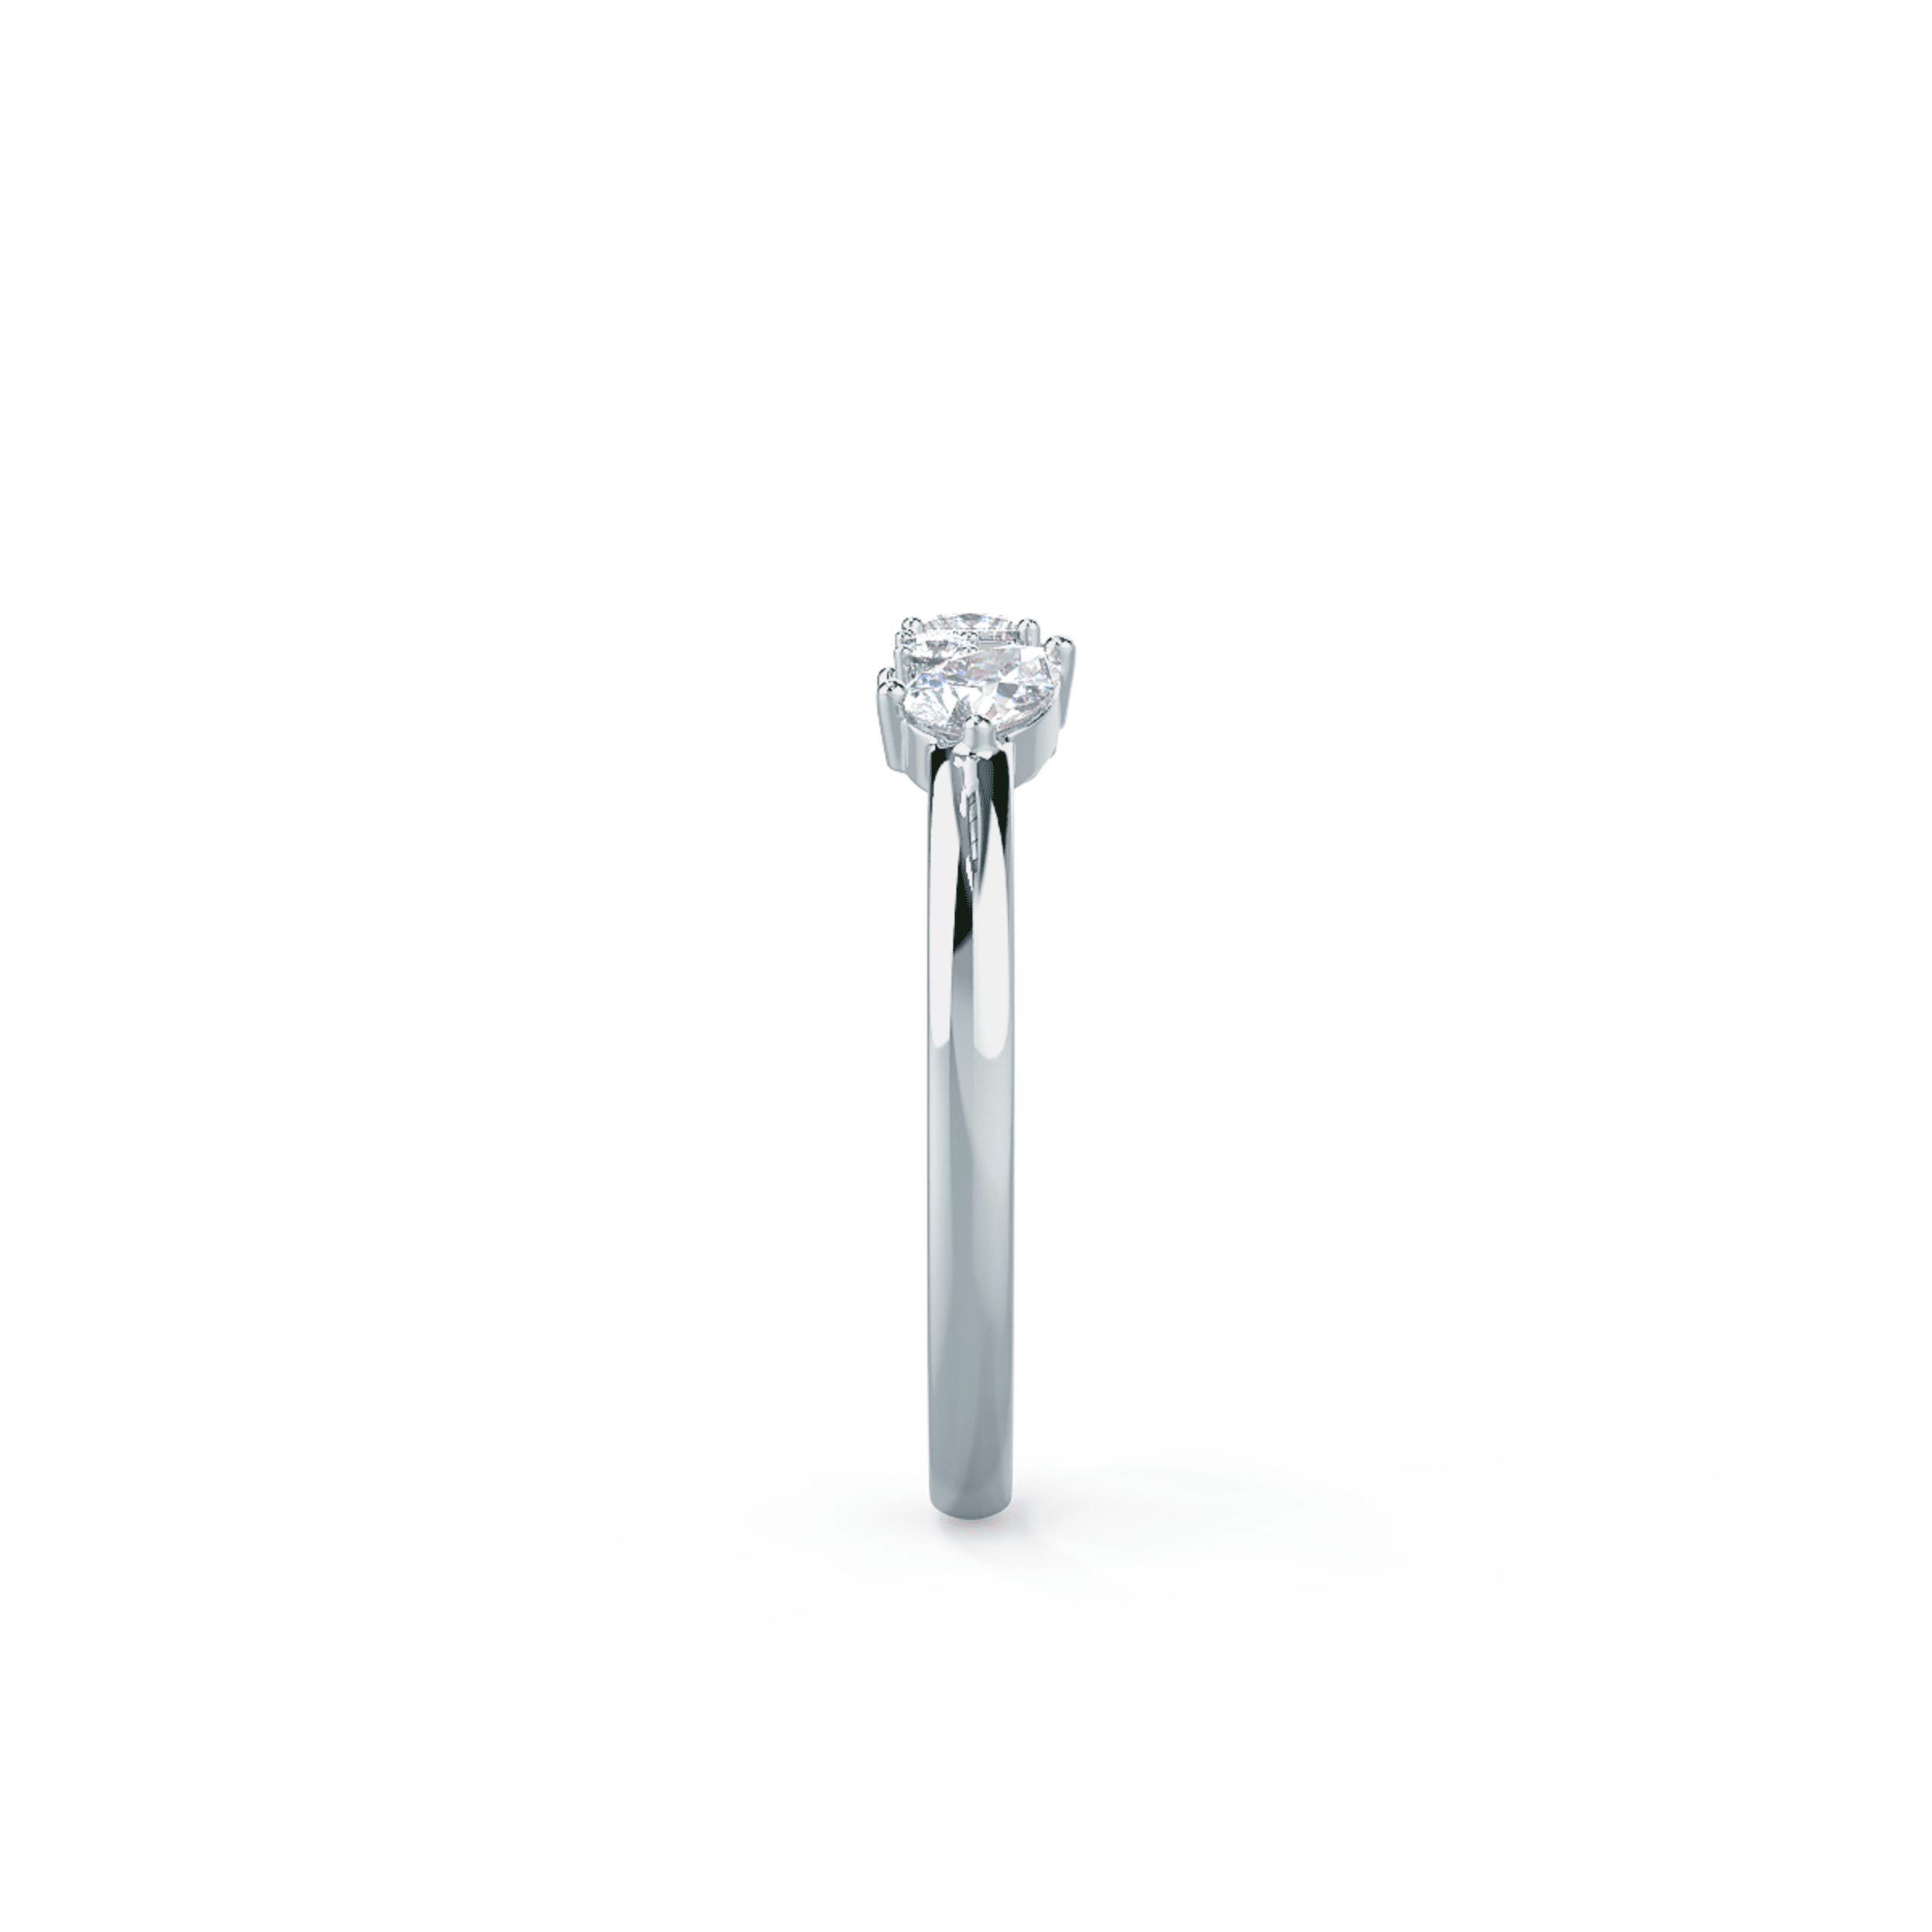 Hand Selected 0.5 Carat Diamonds Kelsey Five Stone in 18k White Gold (Side View)